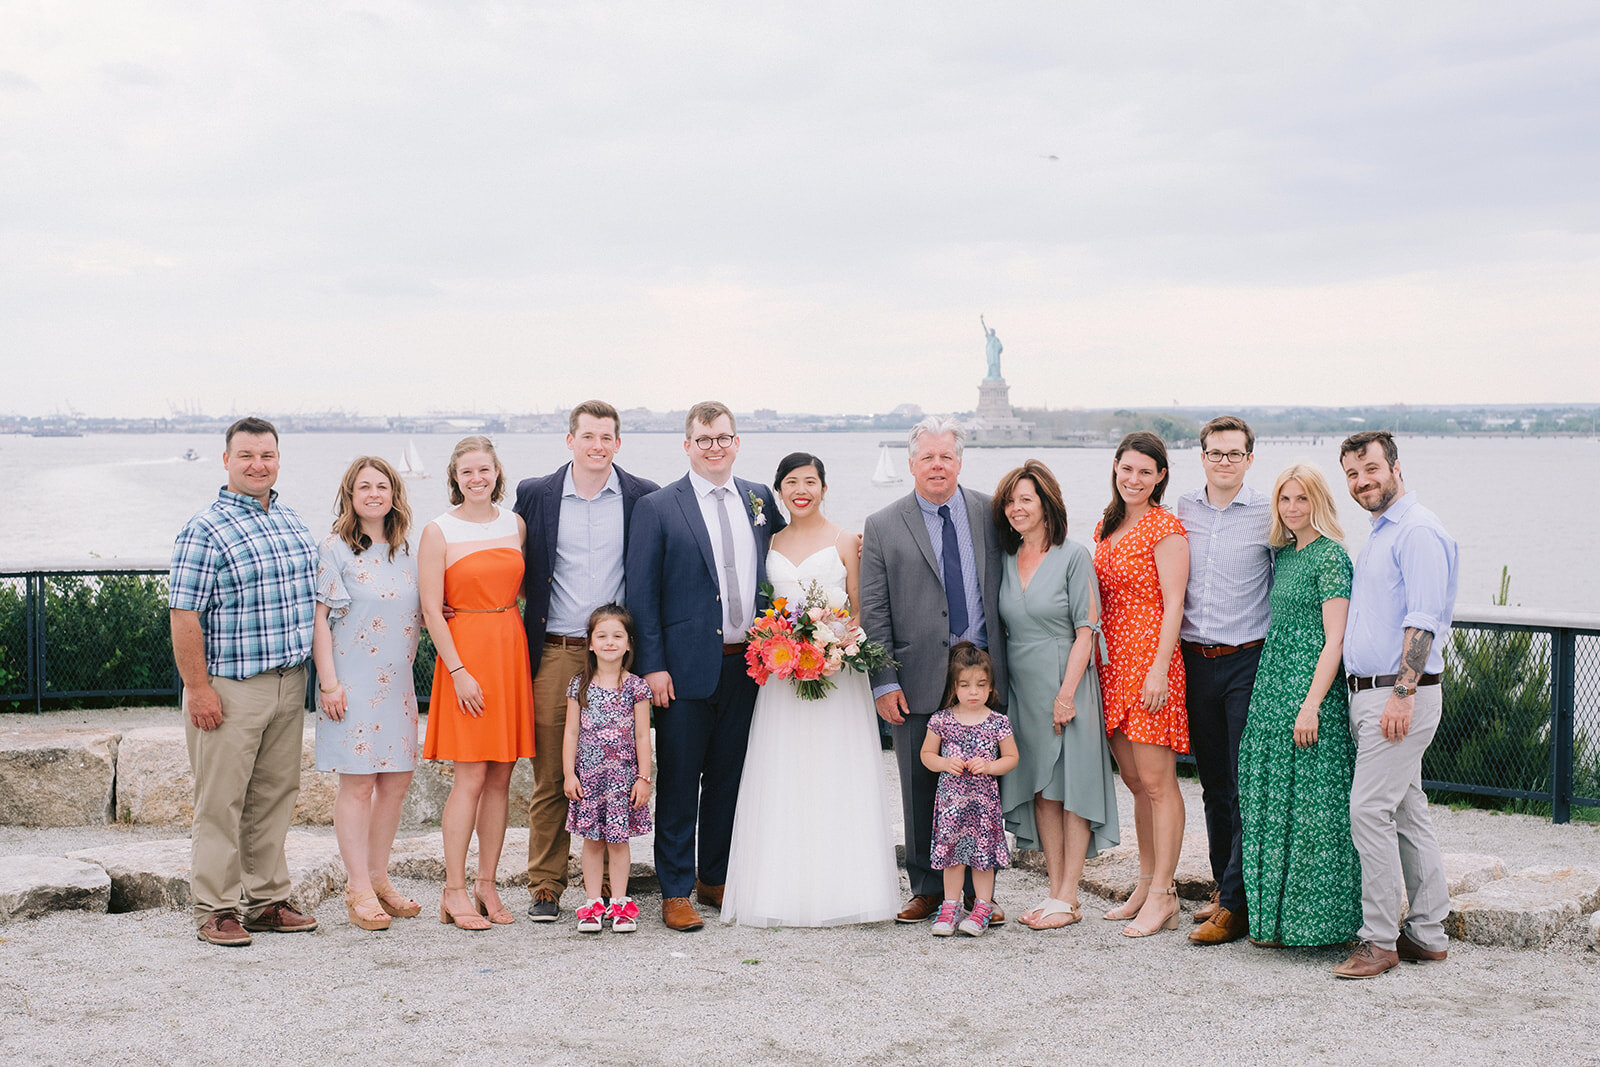 Intimate-Wedding-Ideas-in-NYC-Governors-Island-26